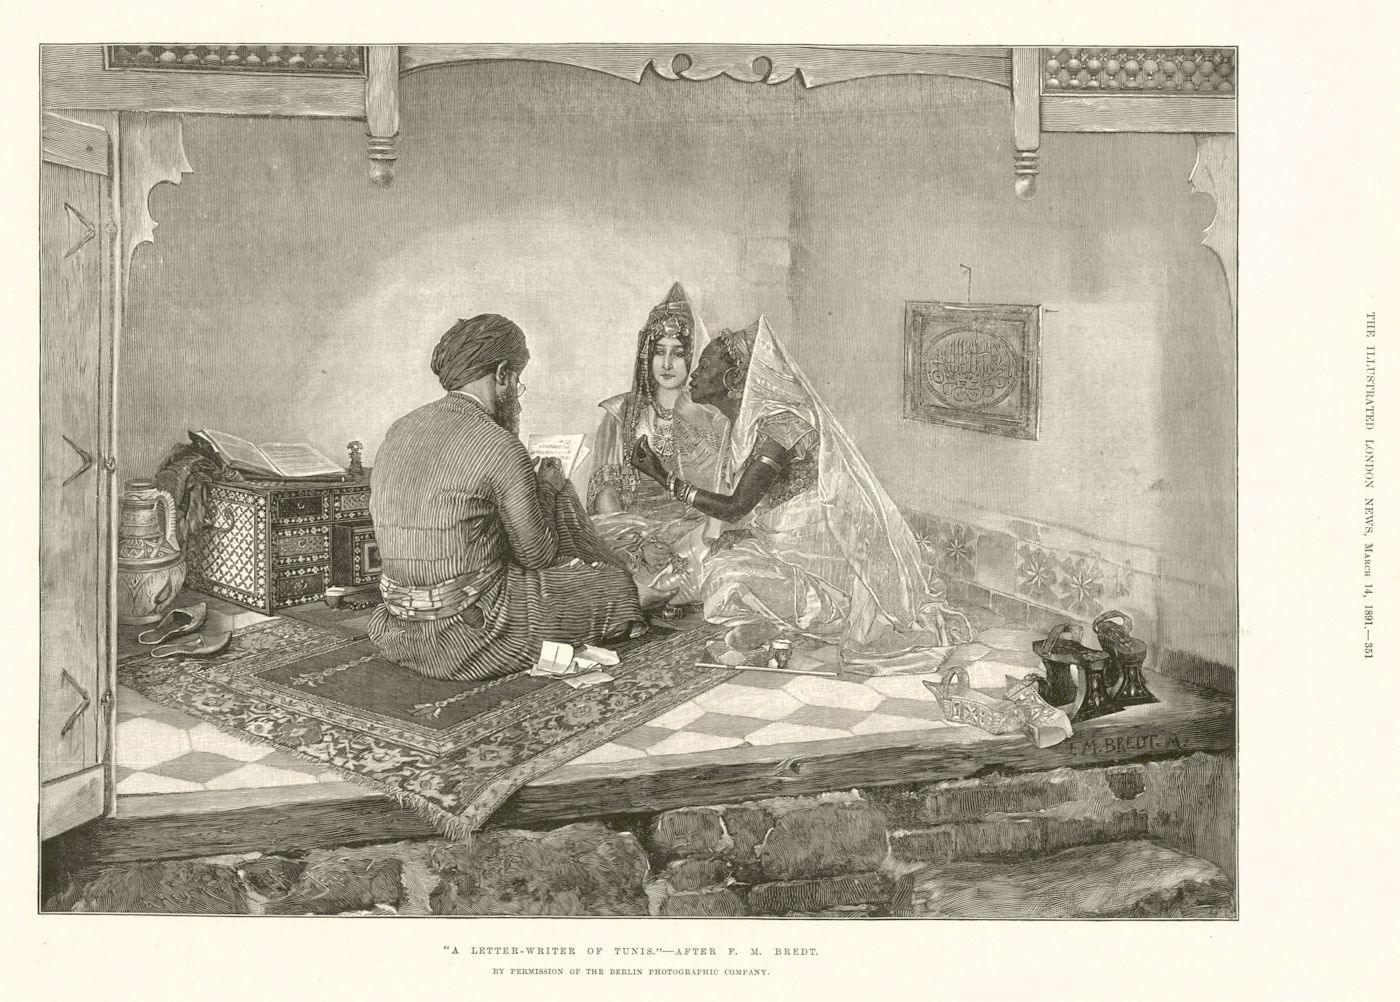 Associate Product " A Letter Writer of Tunis. " - After F. M. Bredt. Tunisia 1891 ILN full page